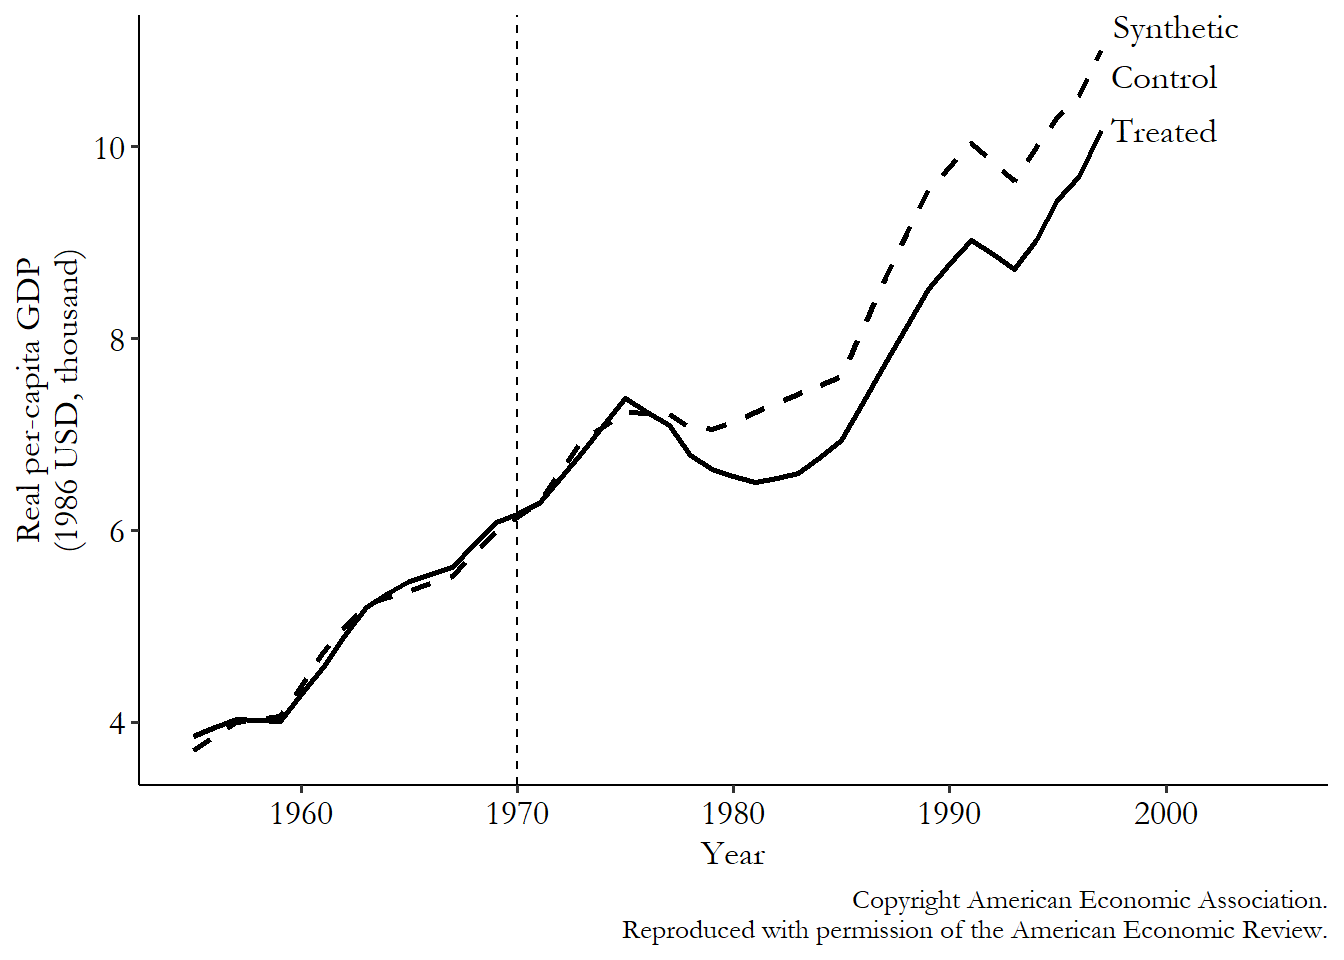 Graph showing GDP per capita over time in the Basque region and in a matched weighted average. They match precisely up to the treatment period and shortly afterwards, and then divide, with the Basque region dropping below the control.